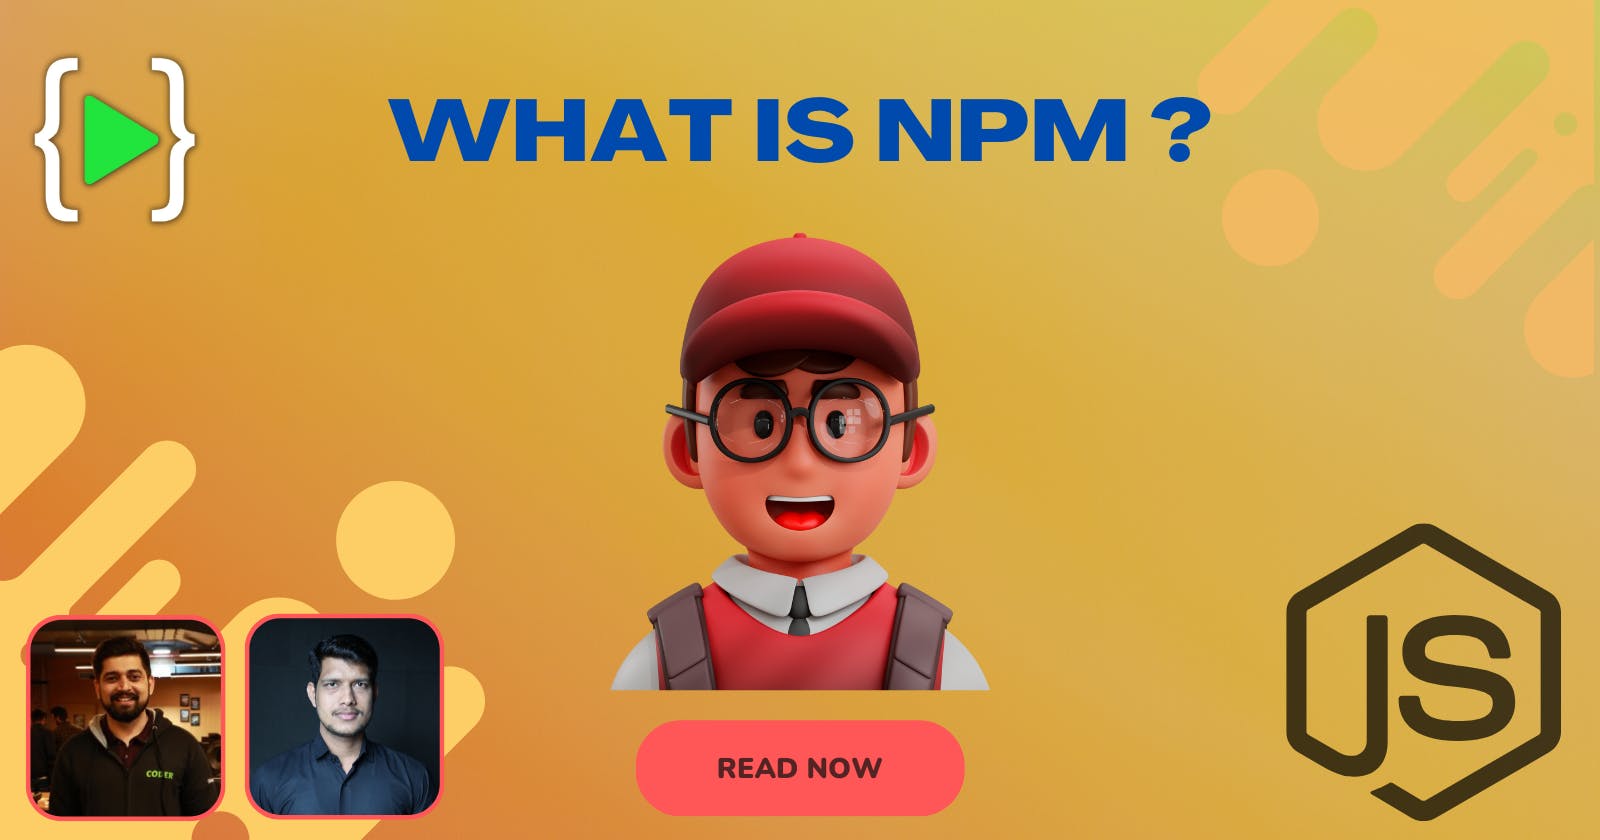 Article About NPM